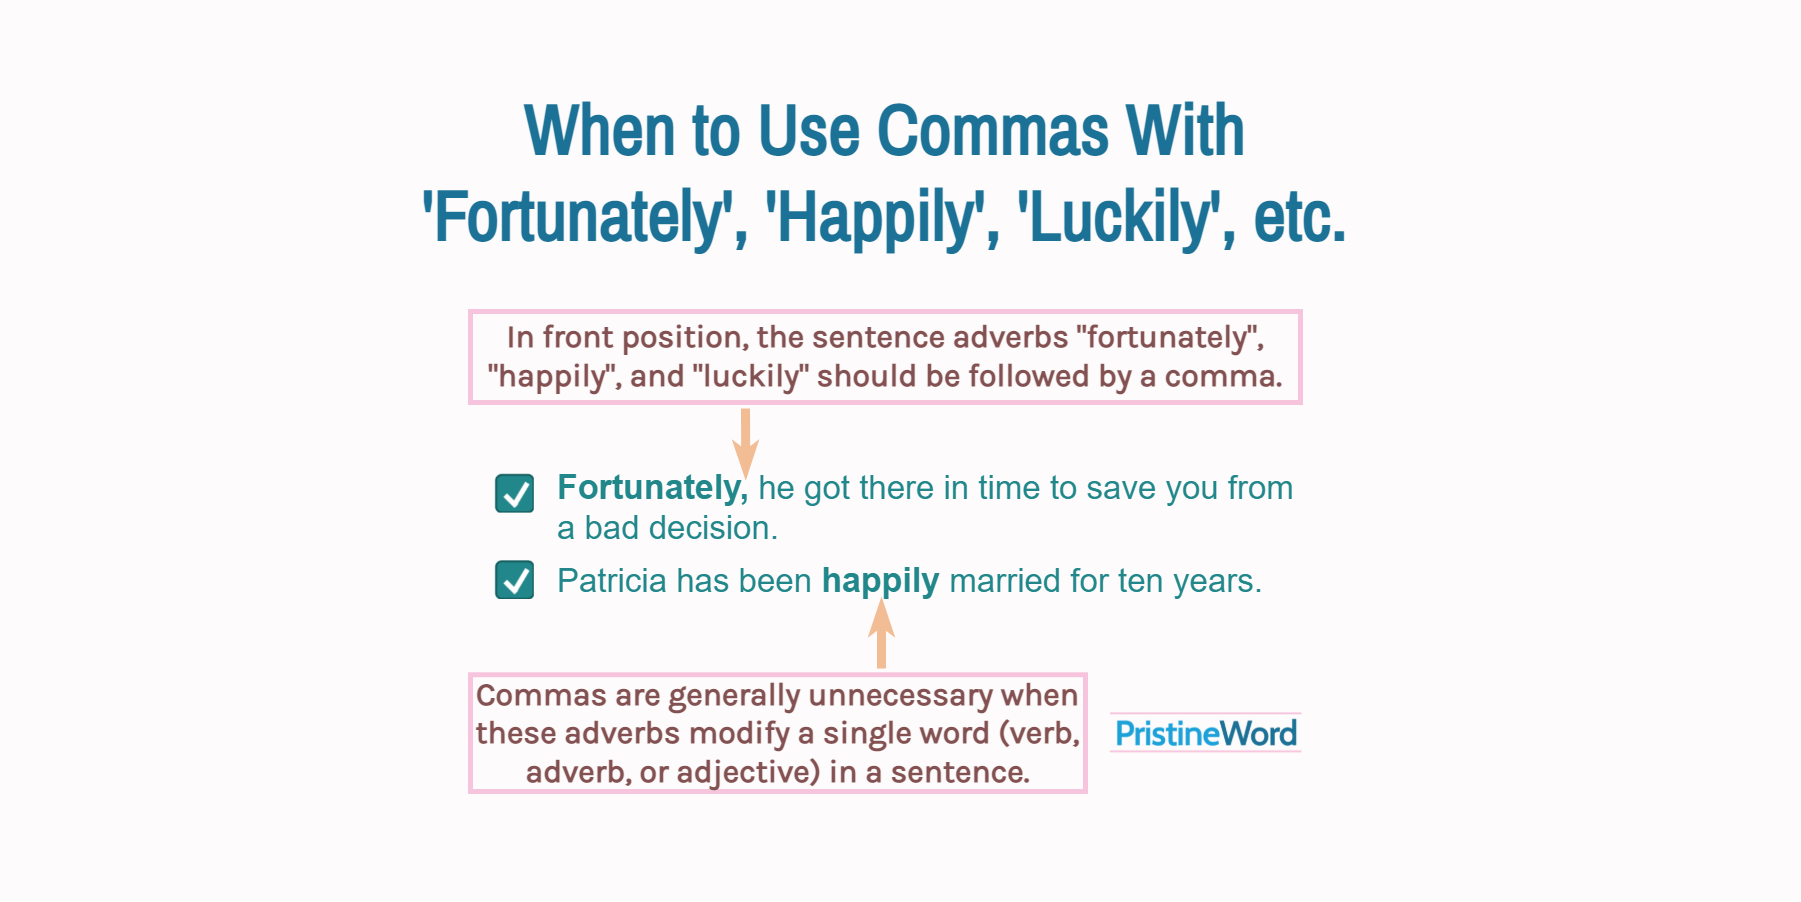 When to Use Commas With 'Fortunately', 'Happily', 'Luckily', etc.